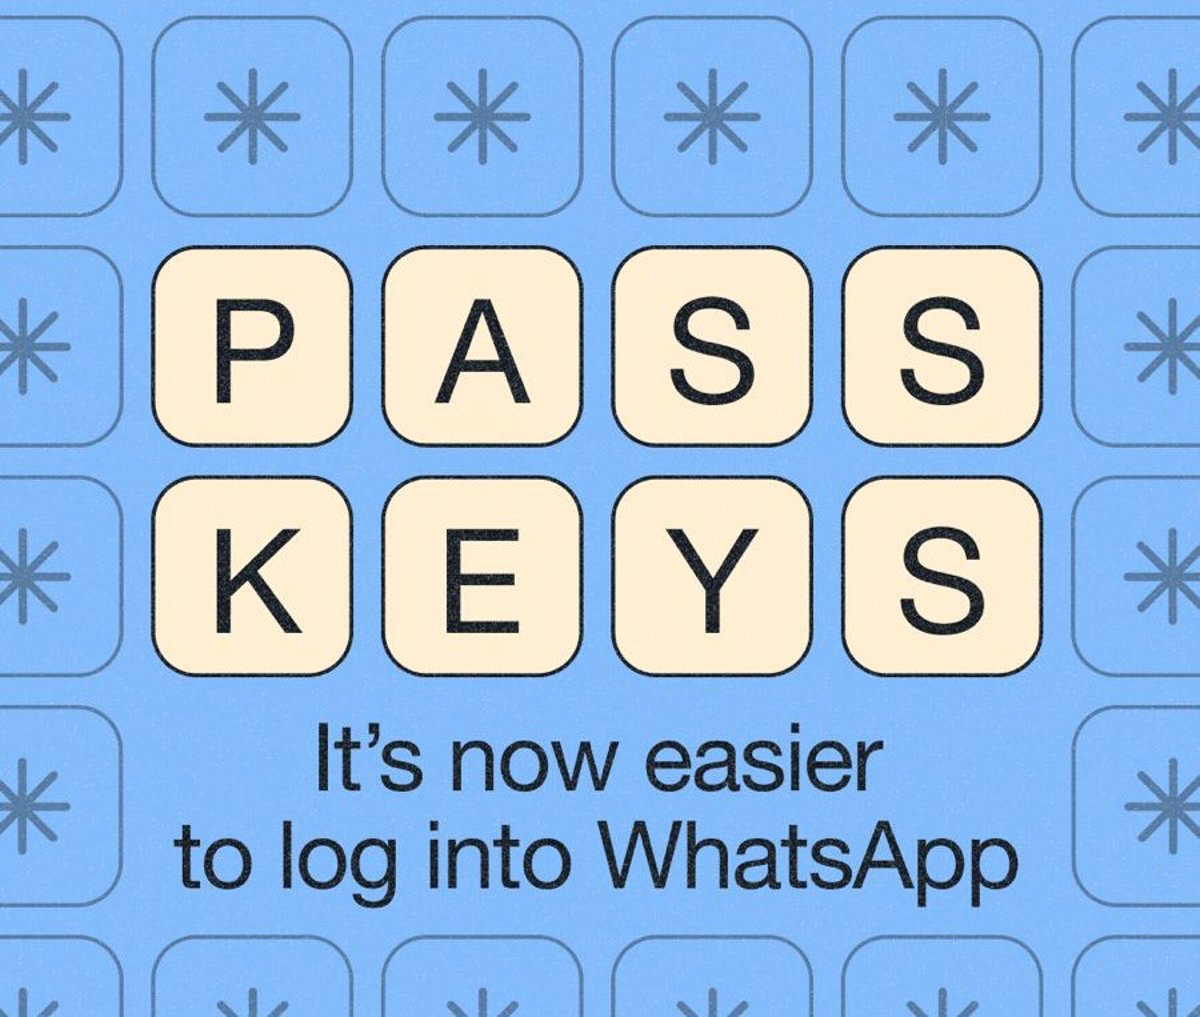 WhatsApp introduces ‘passkeys’ for iOS devices to enhance login security